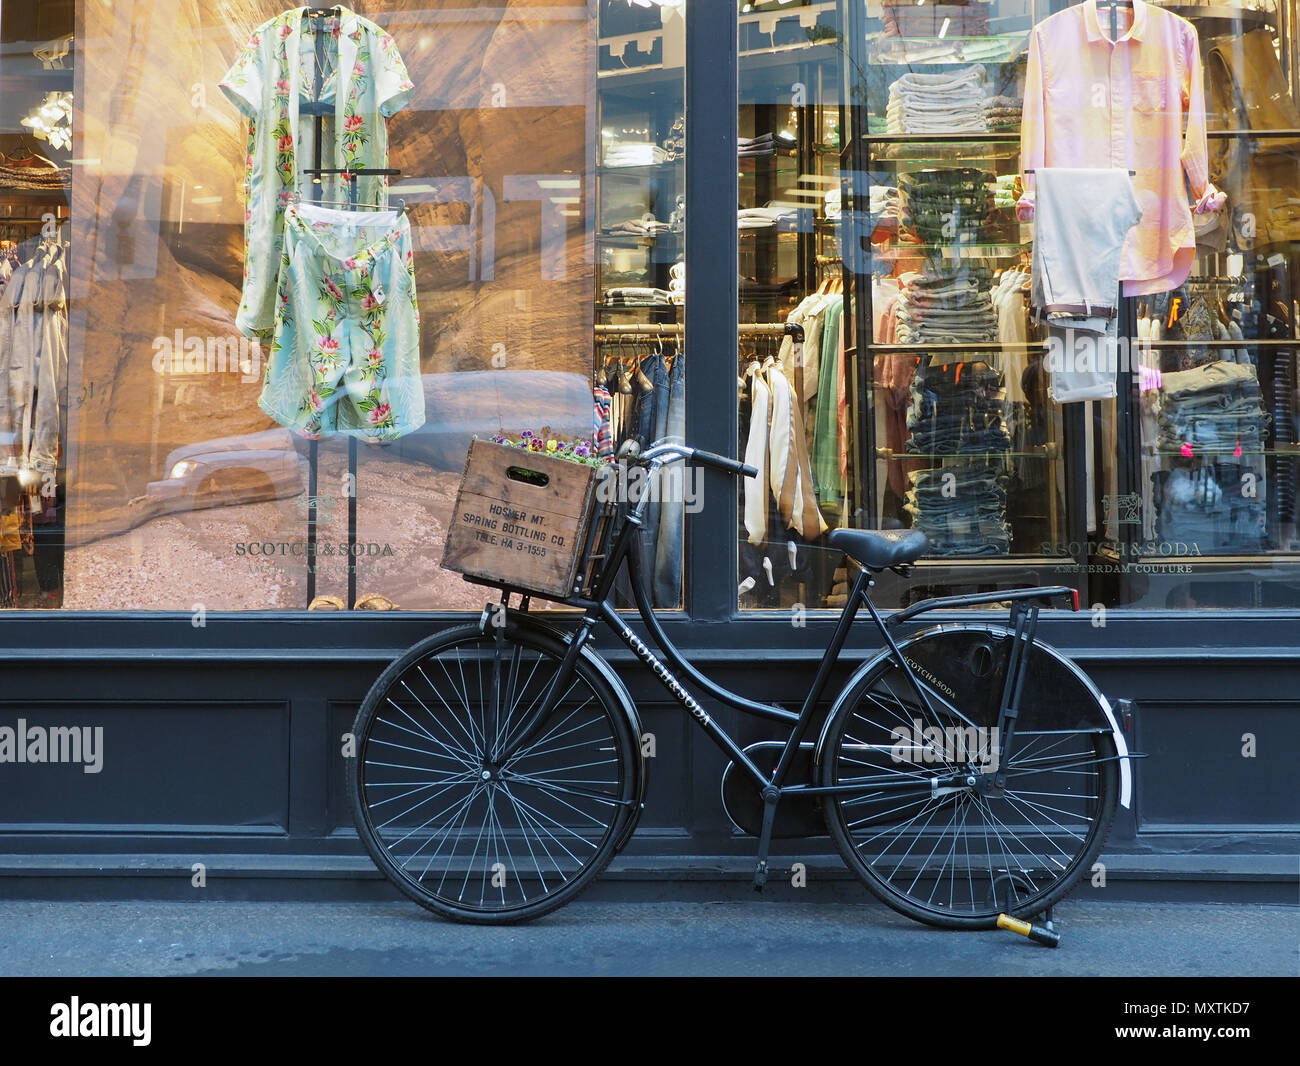 Old bicycle on a sidewalk of Lafayette street in SoHo, New York City Stock Photo